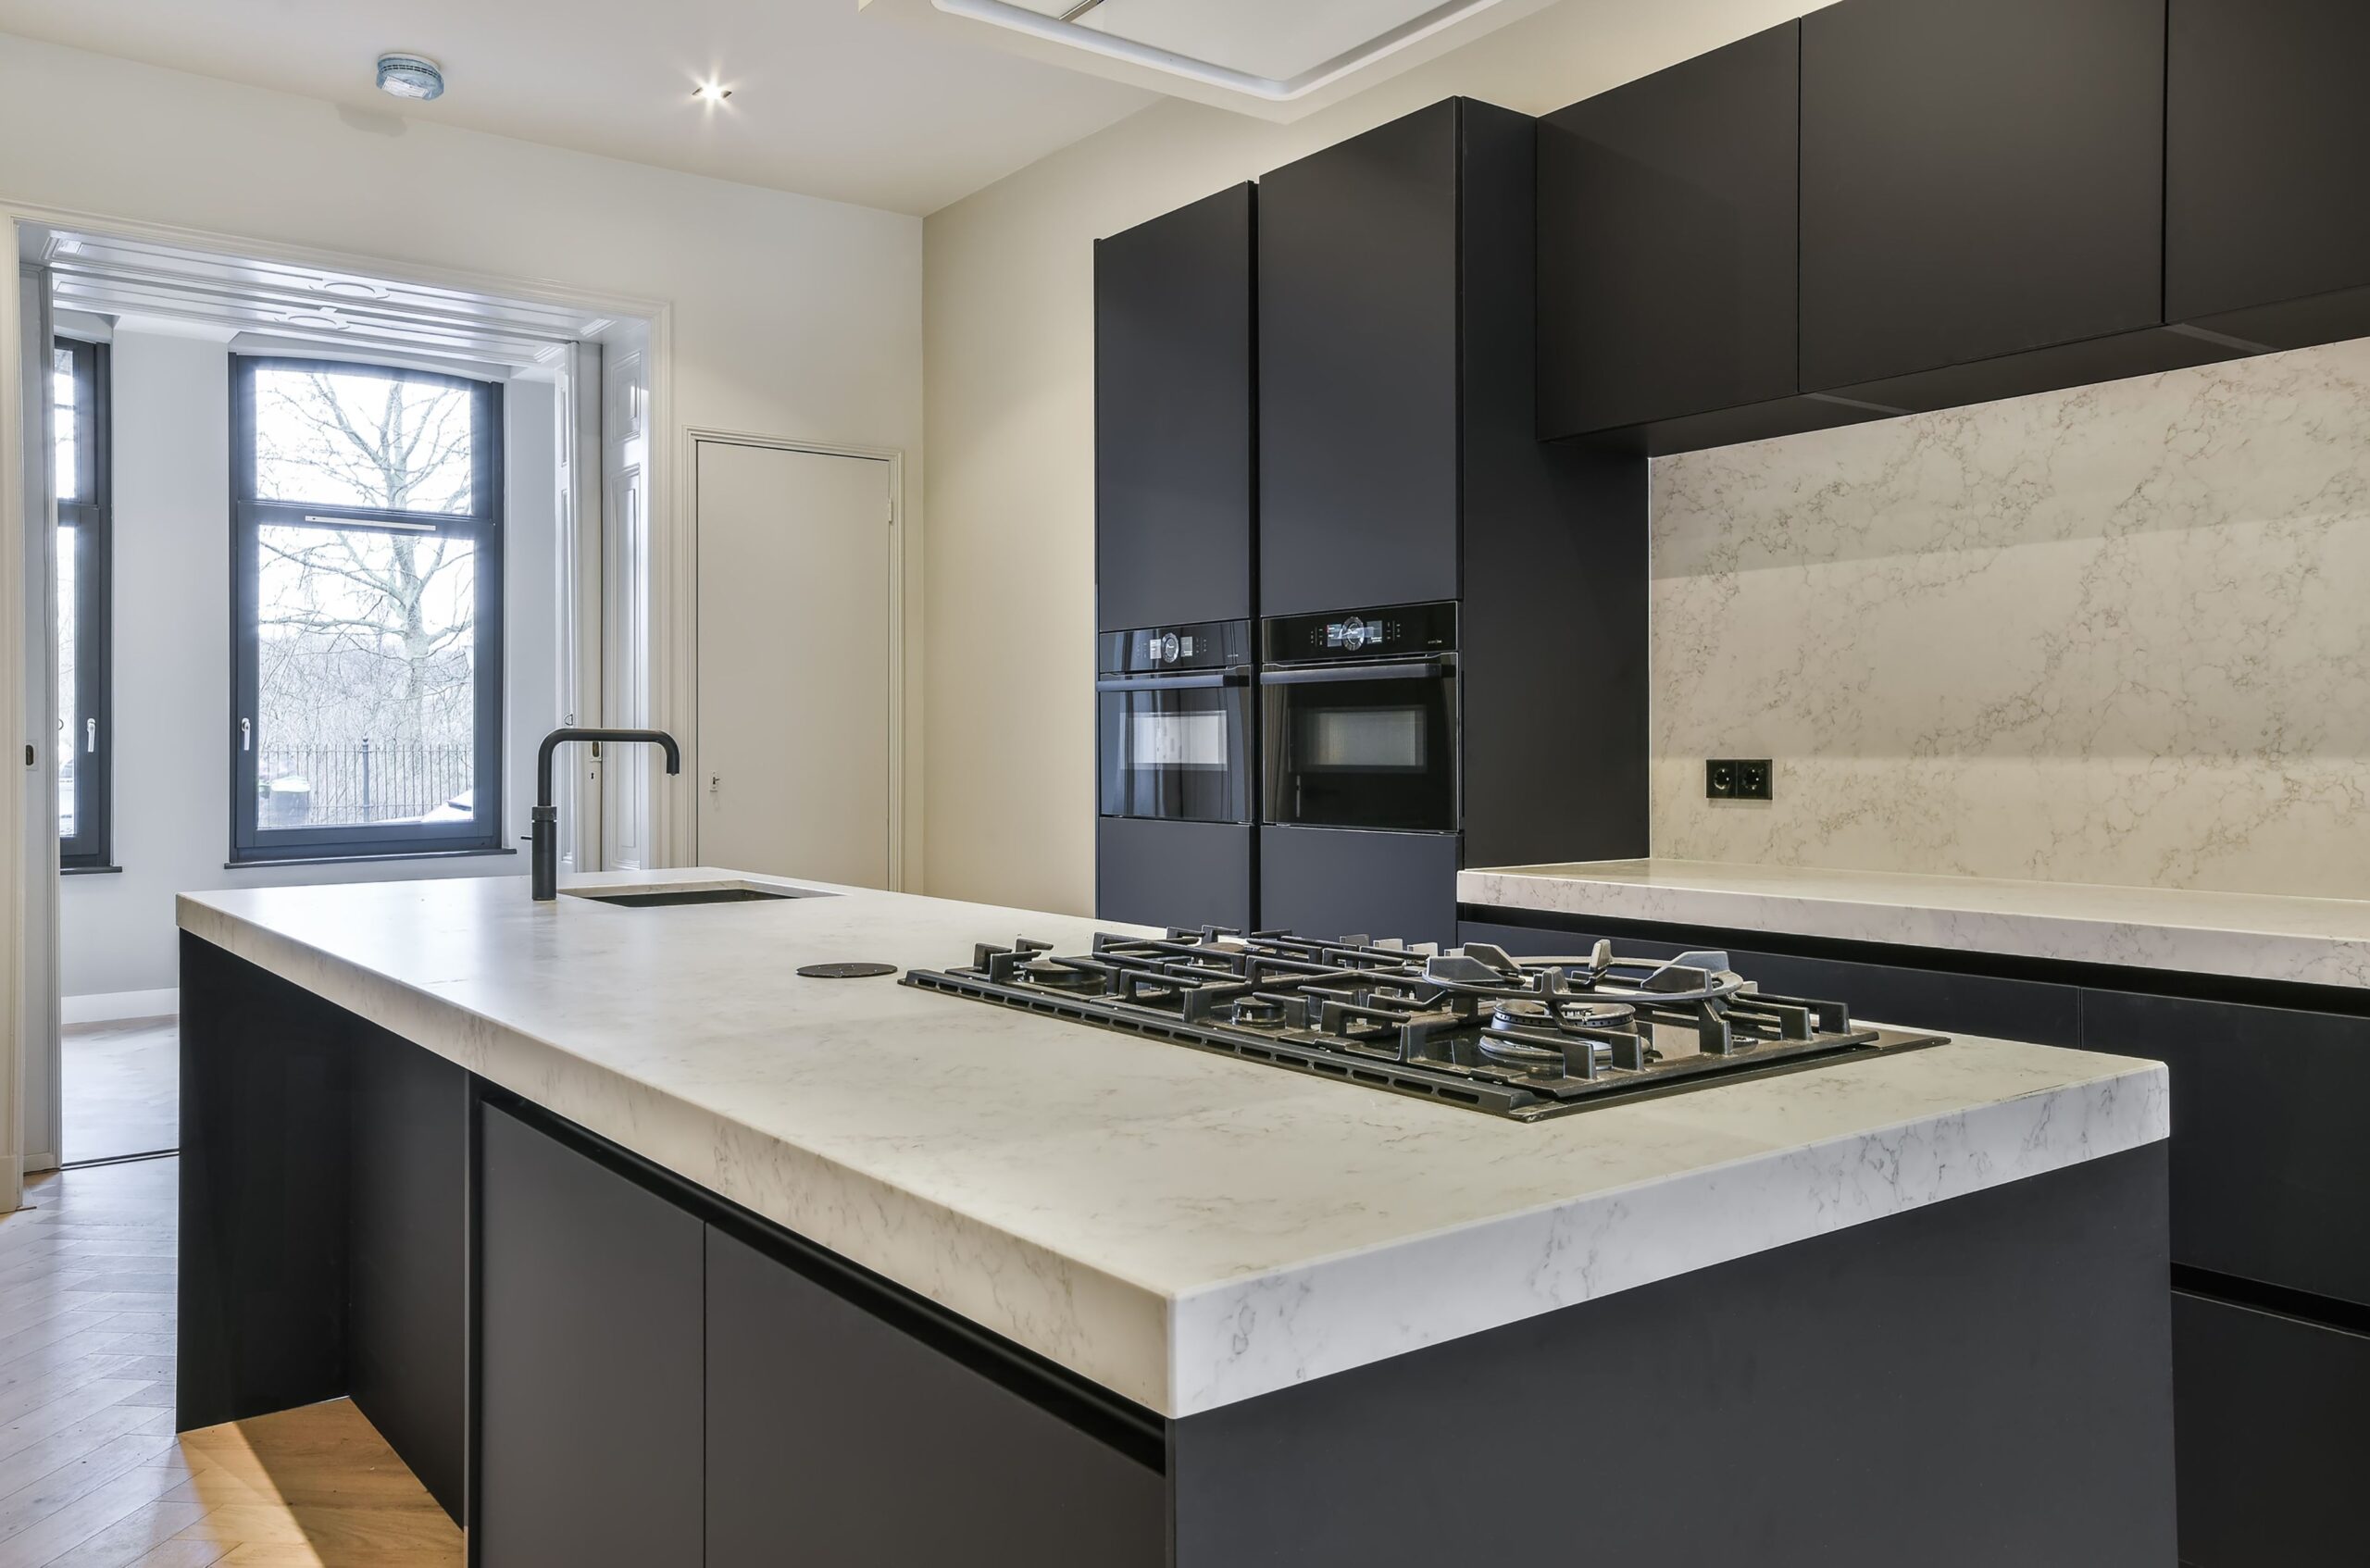 experience luxury living with modern kitchen designs in 2023